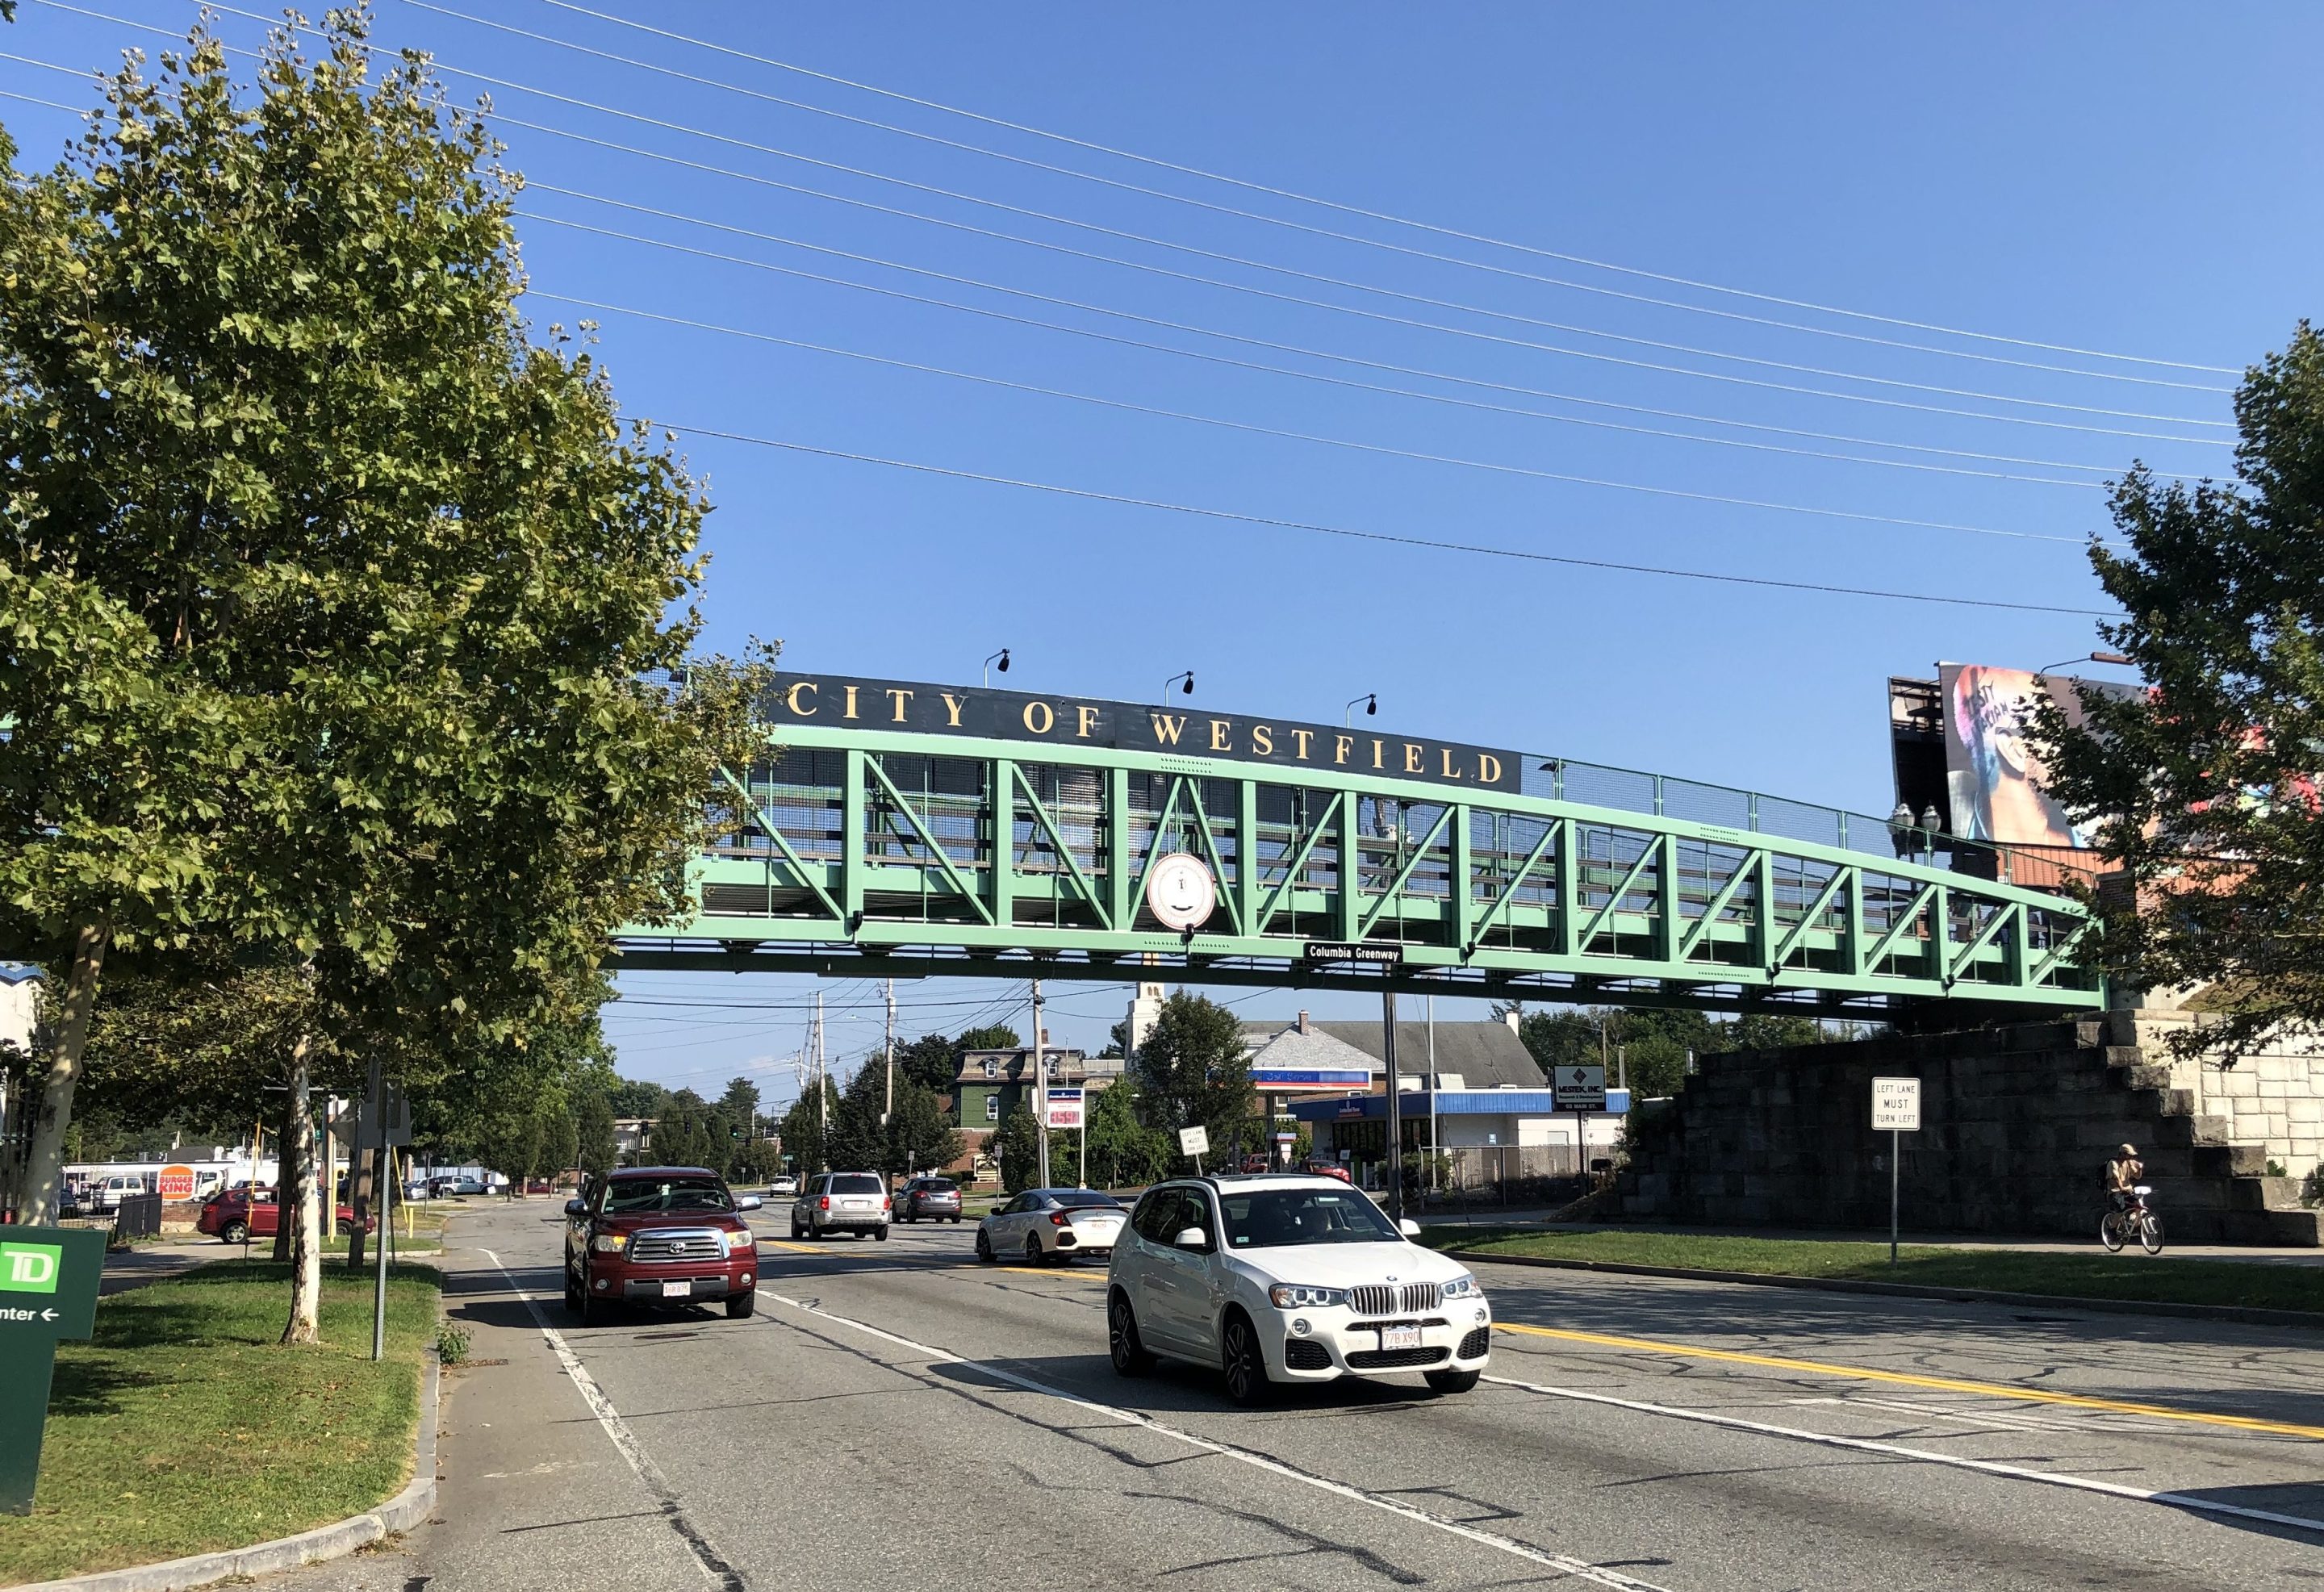 A green truss bridge spans a wide five-lane roadway with two leafy trees on either side on a clear sunny day. A sign along the top railing of the bridge says "CITY OF WESTFIELD" while a smaller sign on the bottom reads "Columbia Greenway". In between the two signs is a round city seal in the center of the bridge.